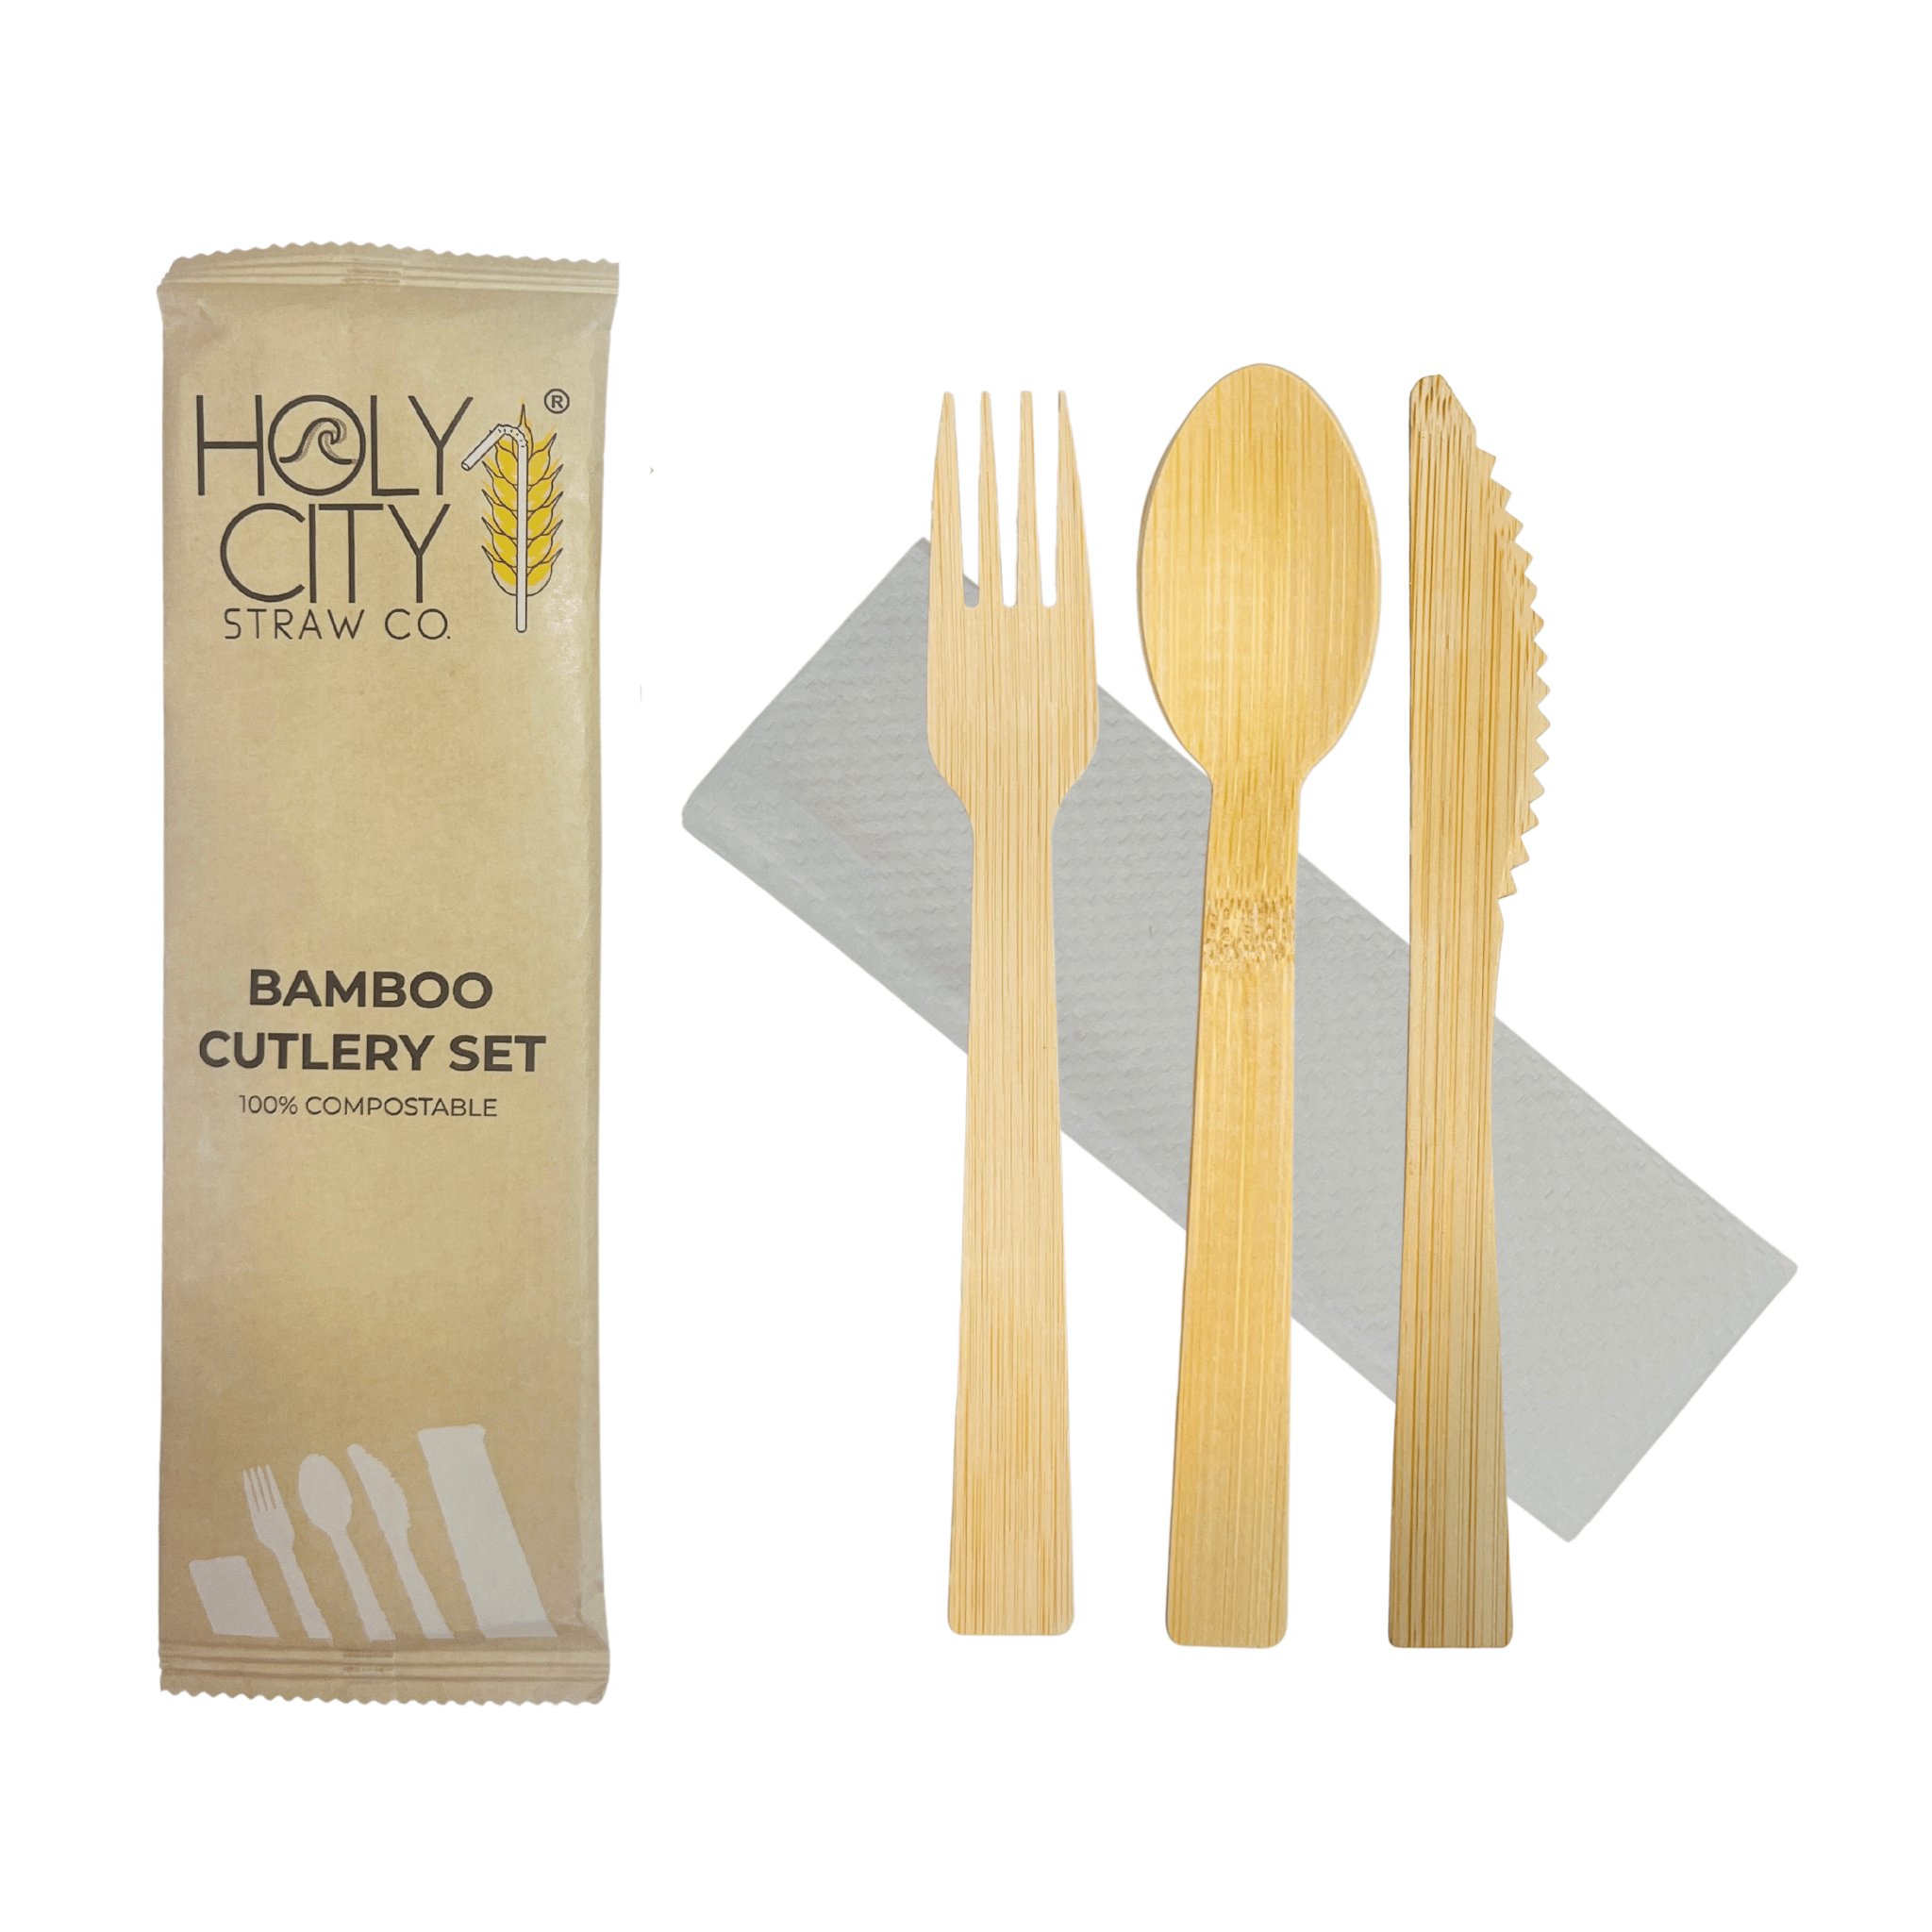 Bamboo Cutlery Set by Holy City Straw Co, 100% Compostable Wrapped Utensils, Eco-Friendly Disposable Fork, Knife, and Spoon with angled Napkin